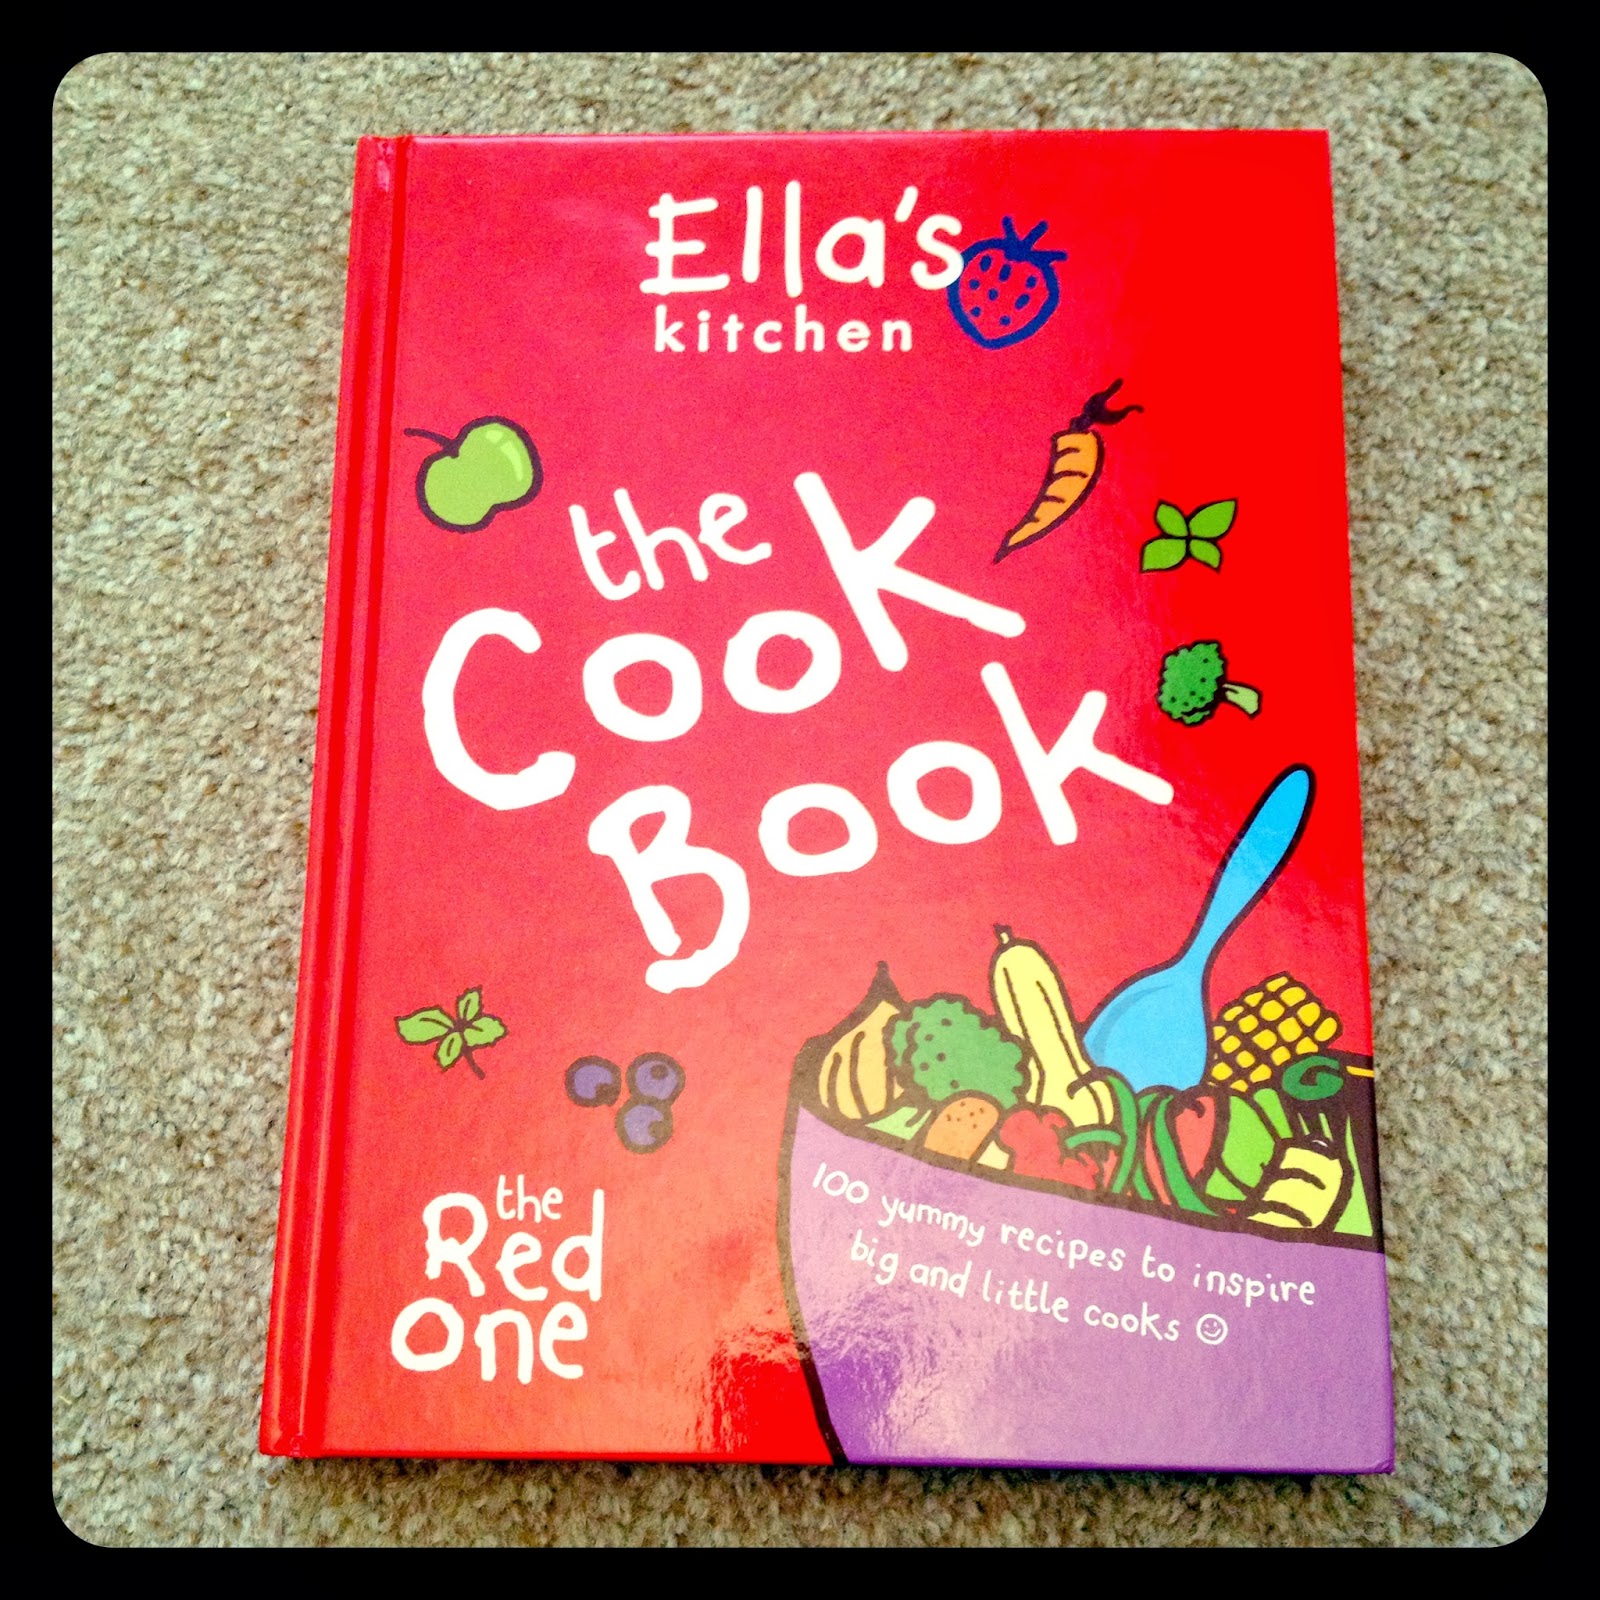 V. I. BAKE: Cooking with kids can be fun with Ella's Kitchen!, Ellas kitchen | cooking for toddlers and baby | V. I. BAKE | Kids cookbook| Cooking can be fun | mamasVIB